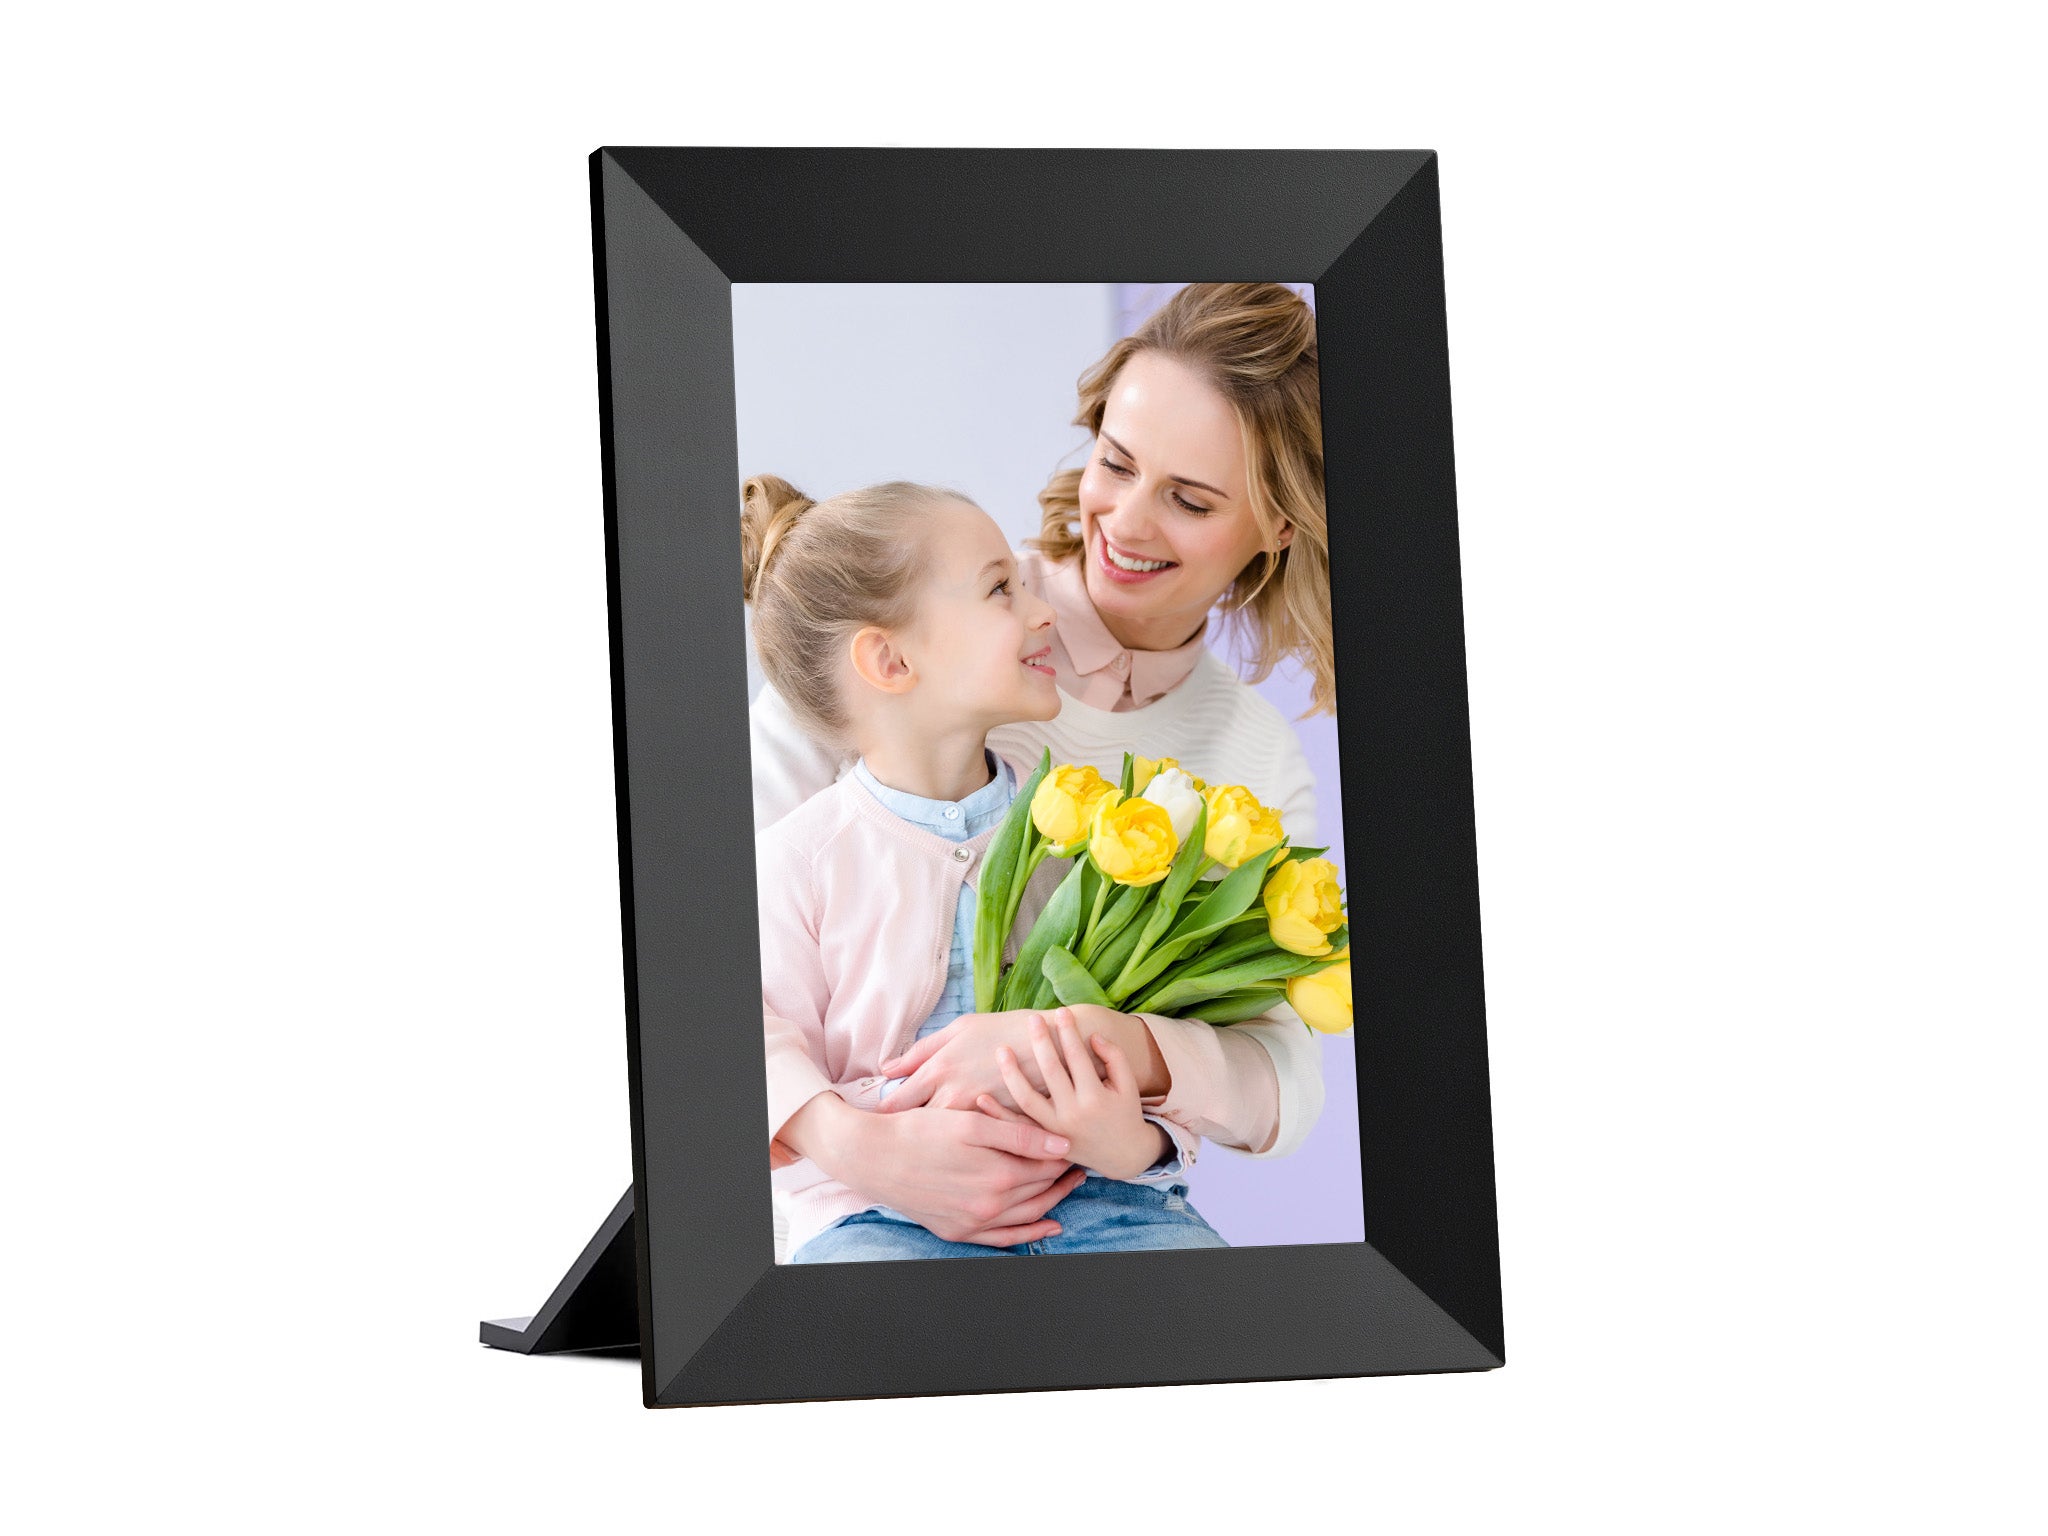 Digital frame RegeMoudal 12 Inch Electronic photo frame with Wireless Remote Control Support SD Card/USB 